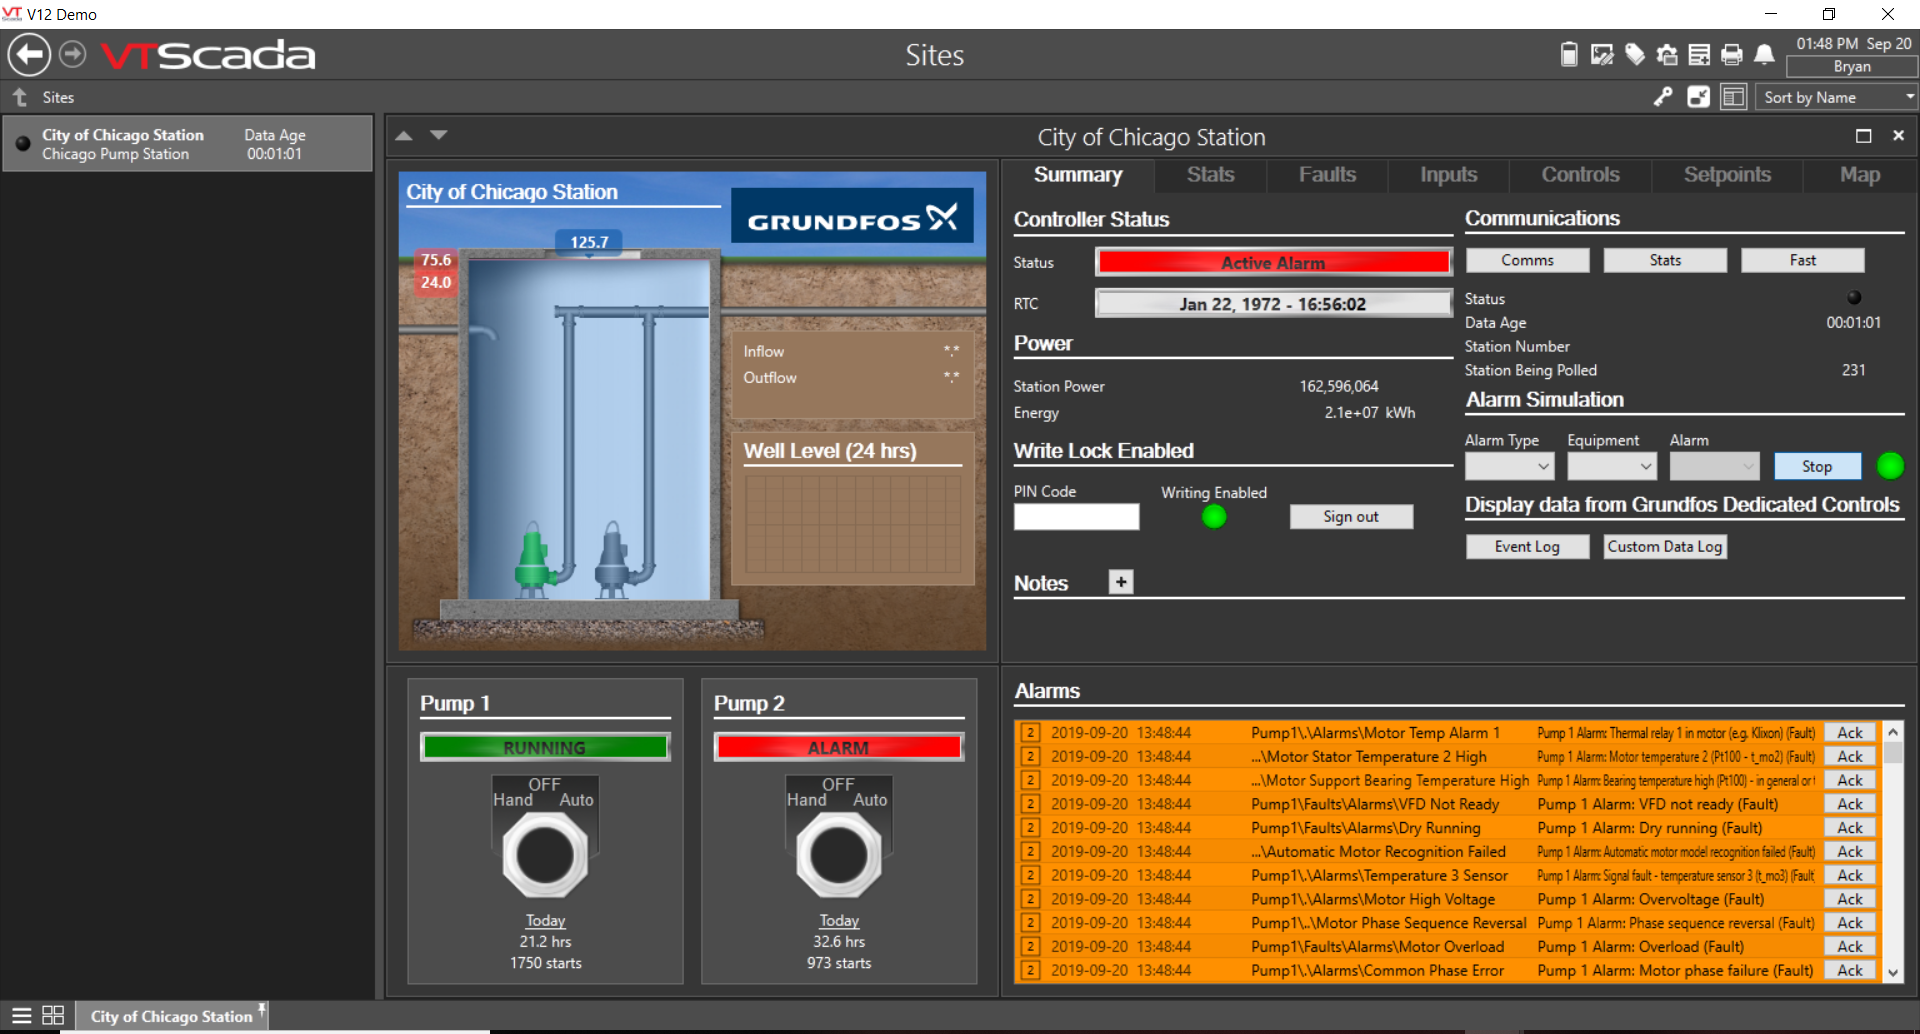 With the latest VTScada release and integration of Trihedral’s HMI software into the Grundfos Tag and Screen Builder, operators can plug in Grundfos monitoring and control devices and VTScada does the rest.